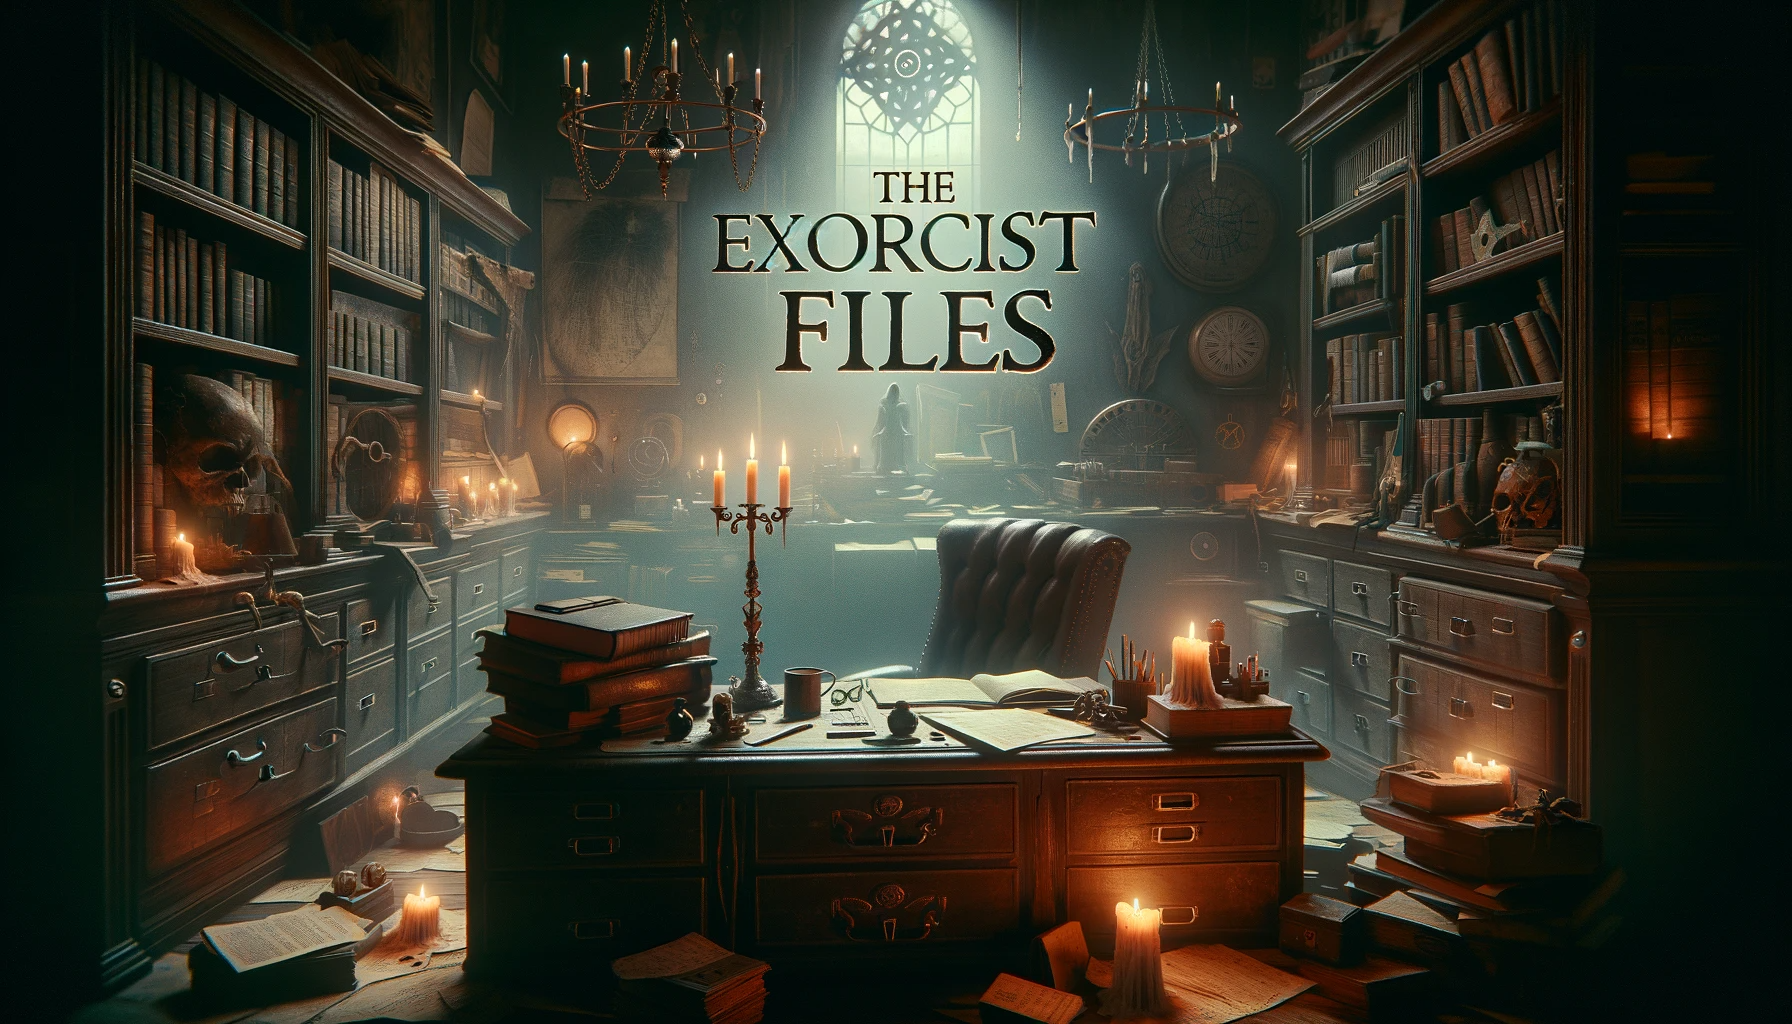 Update on “The Exorcist Files” Podcast